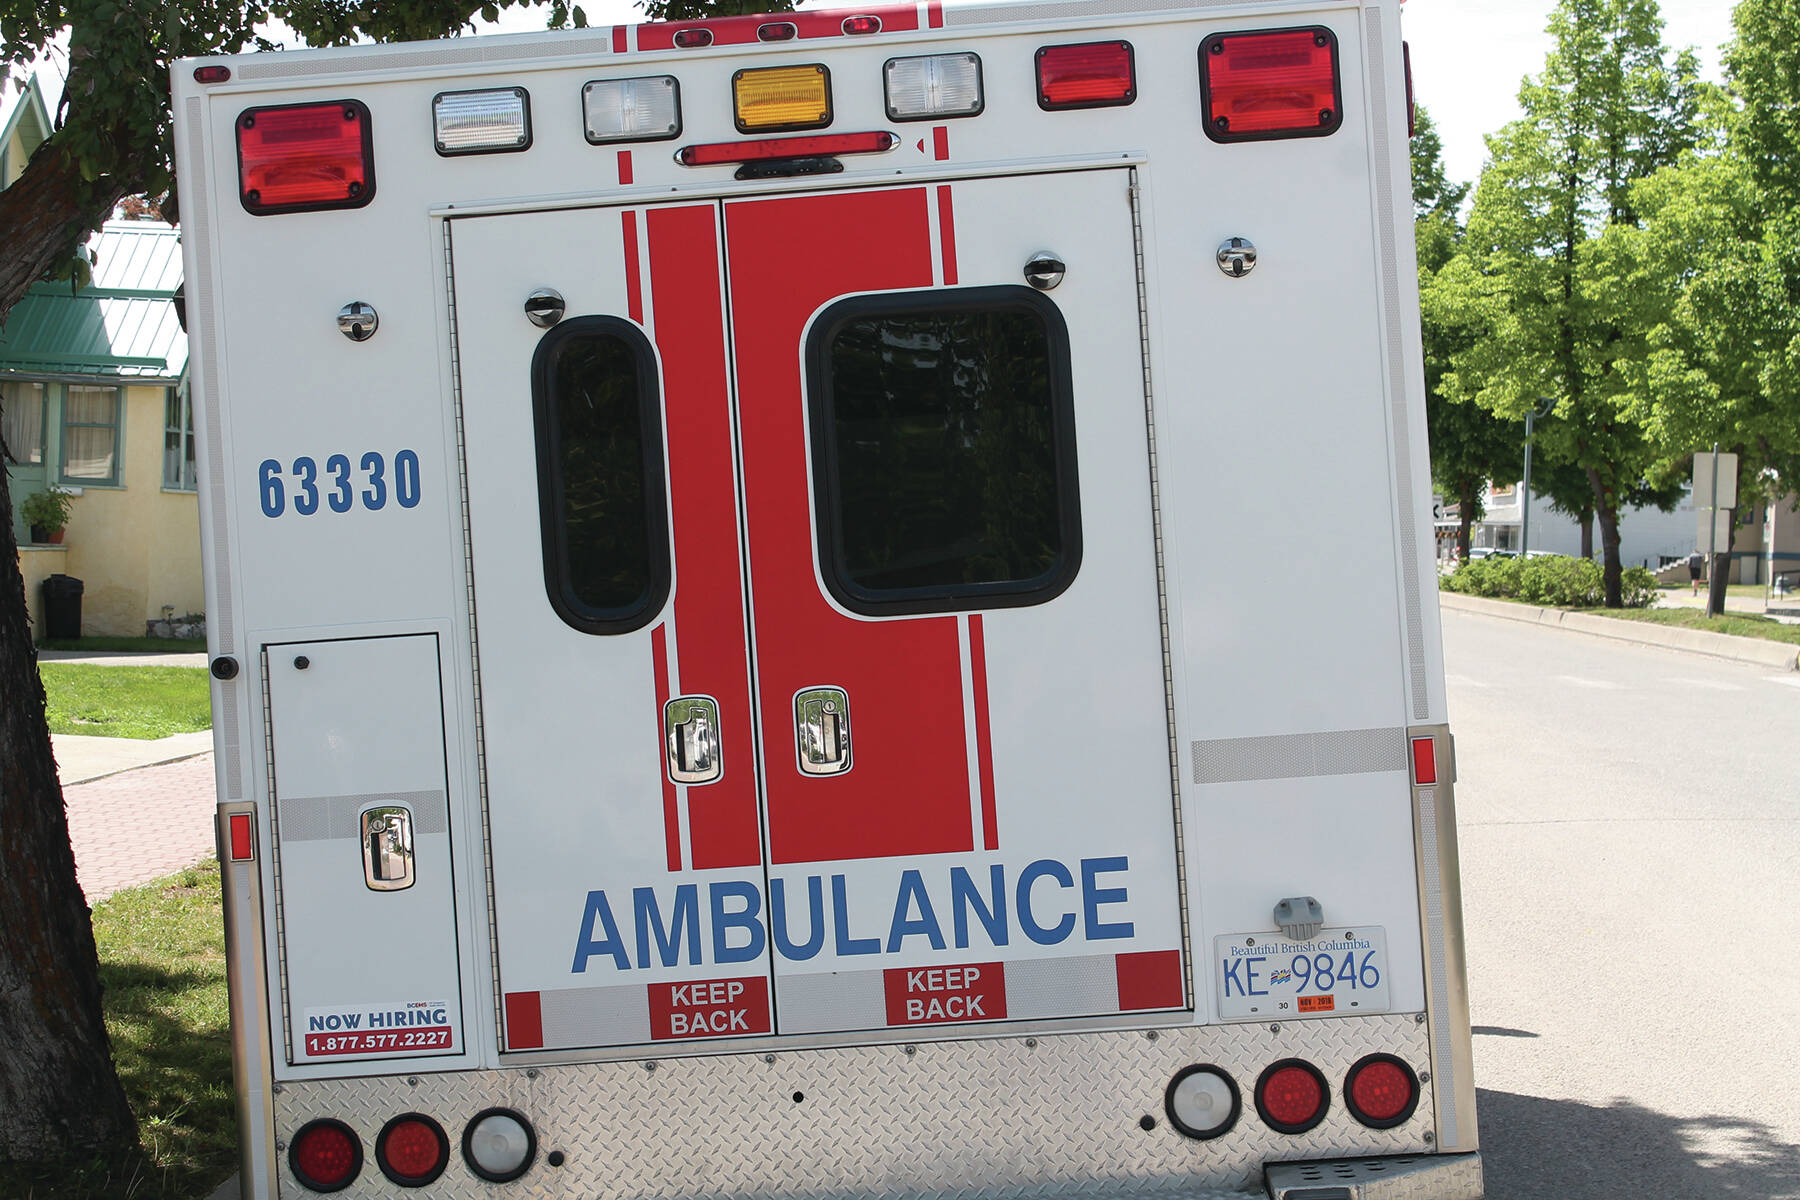 An ambulance was stolen from Penticton hospital and a man later arrested on Jan. 17. (File photo)